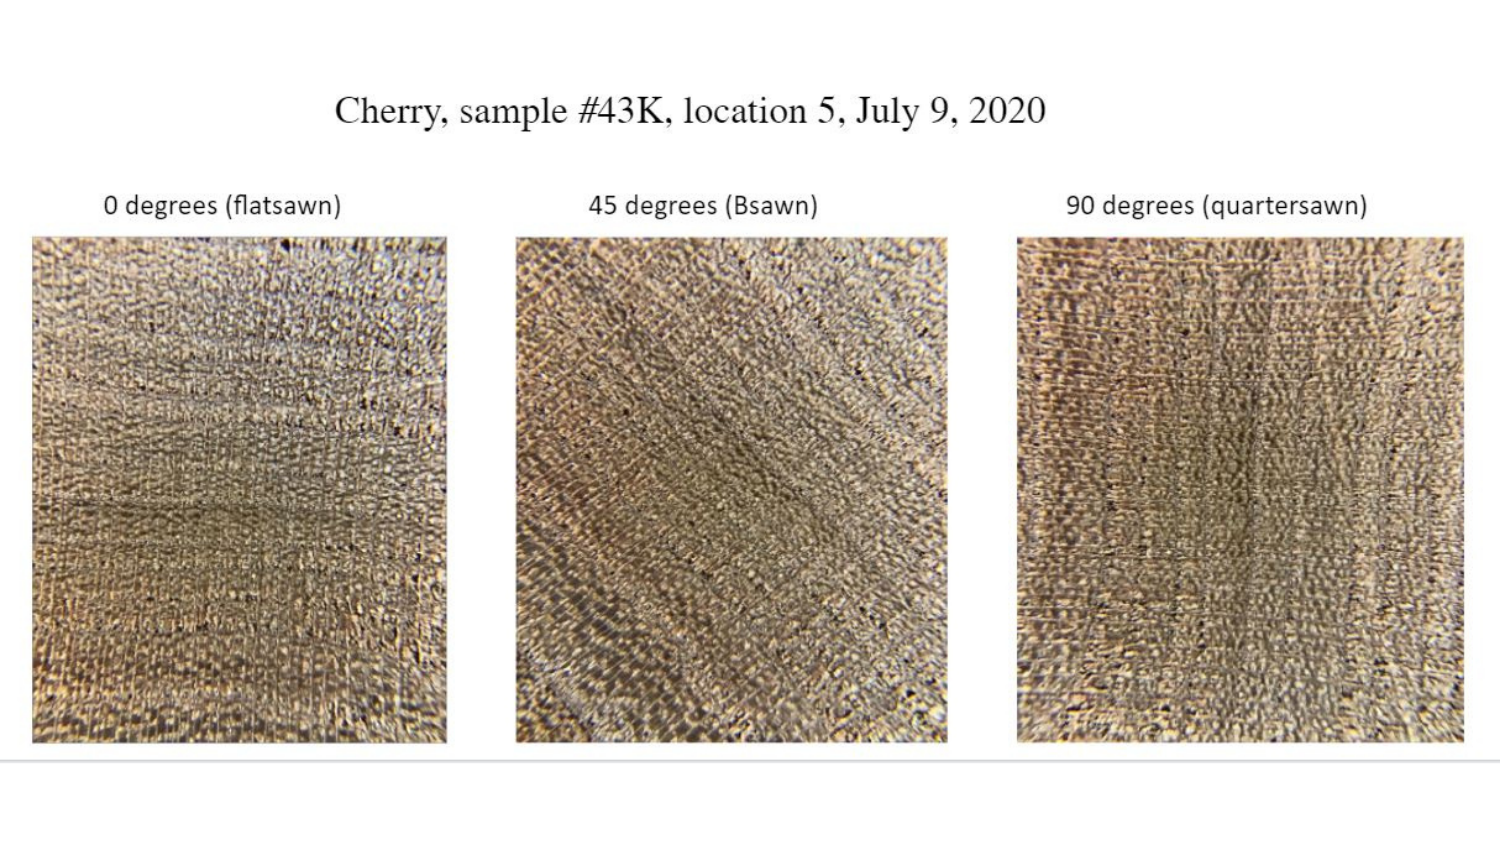 Cherry Sample - Machine Learning in Wood Identification - Forest Biomaterials NC State University